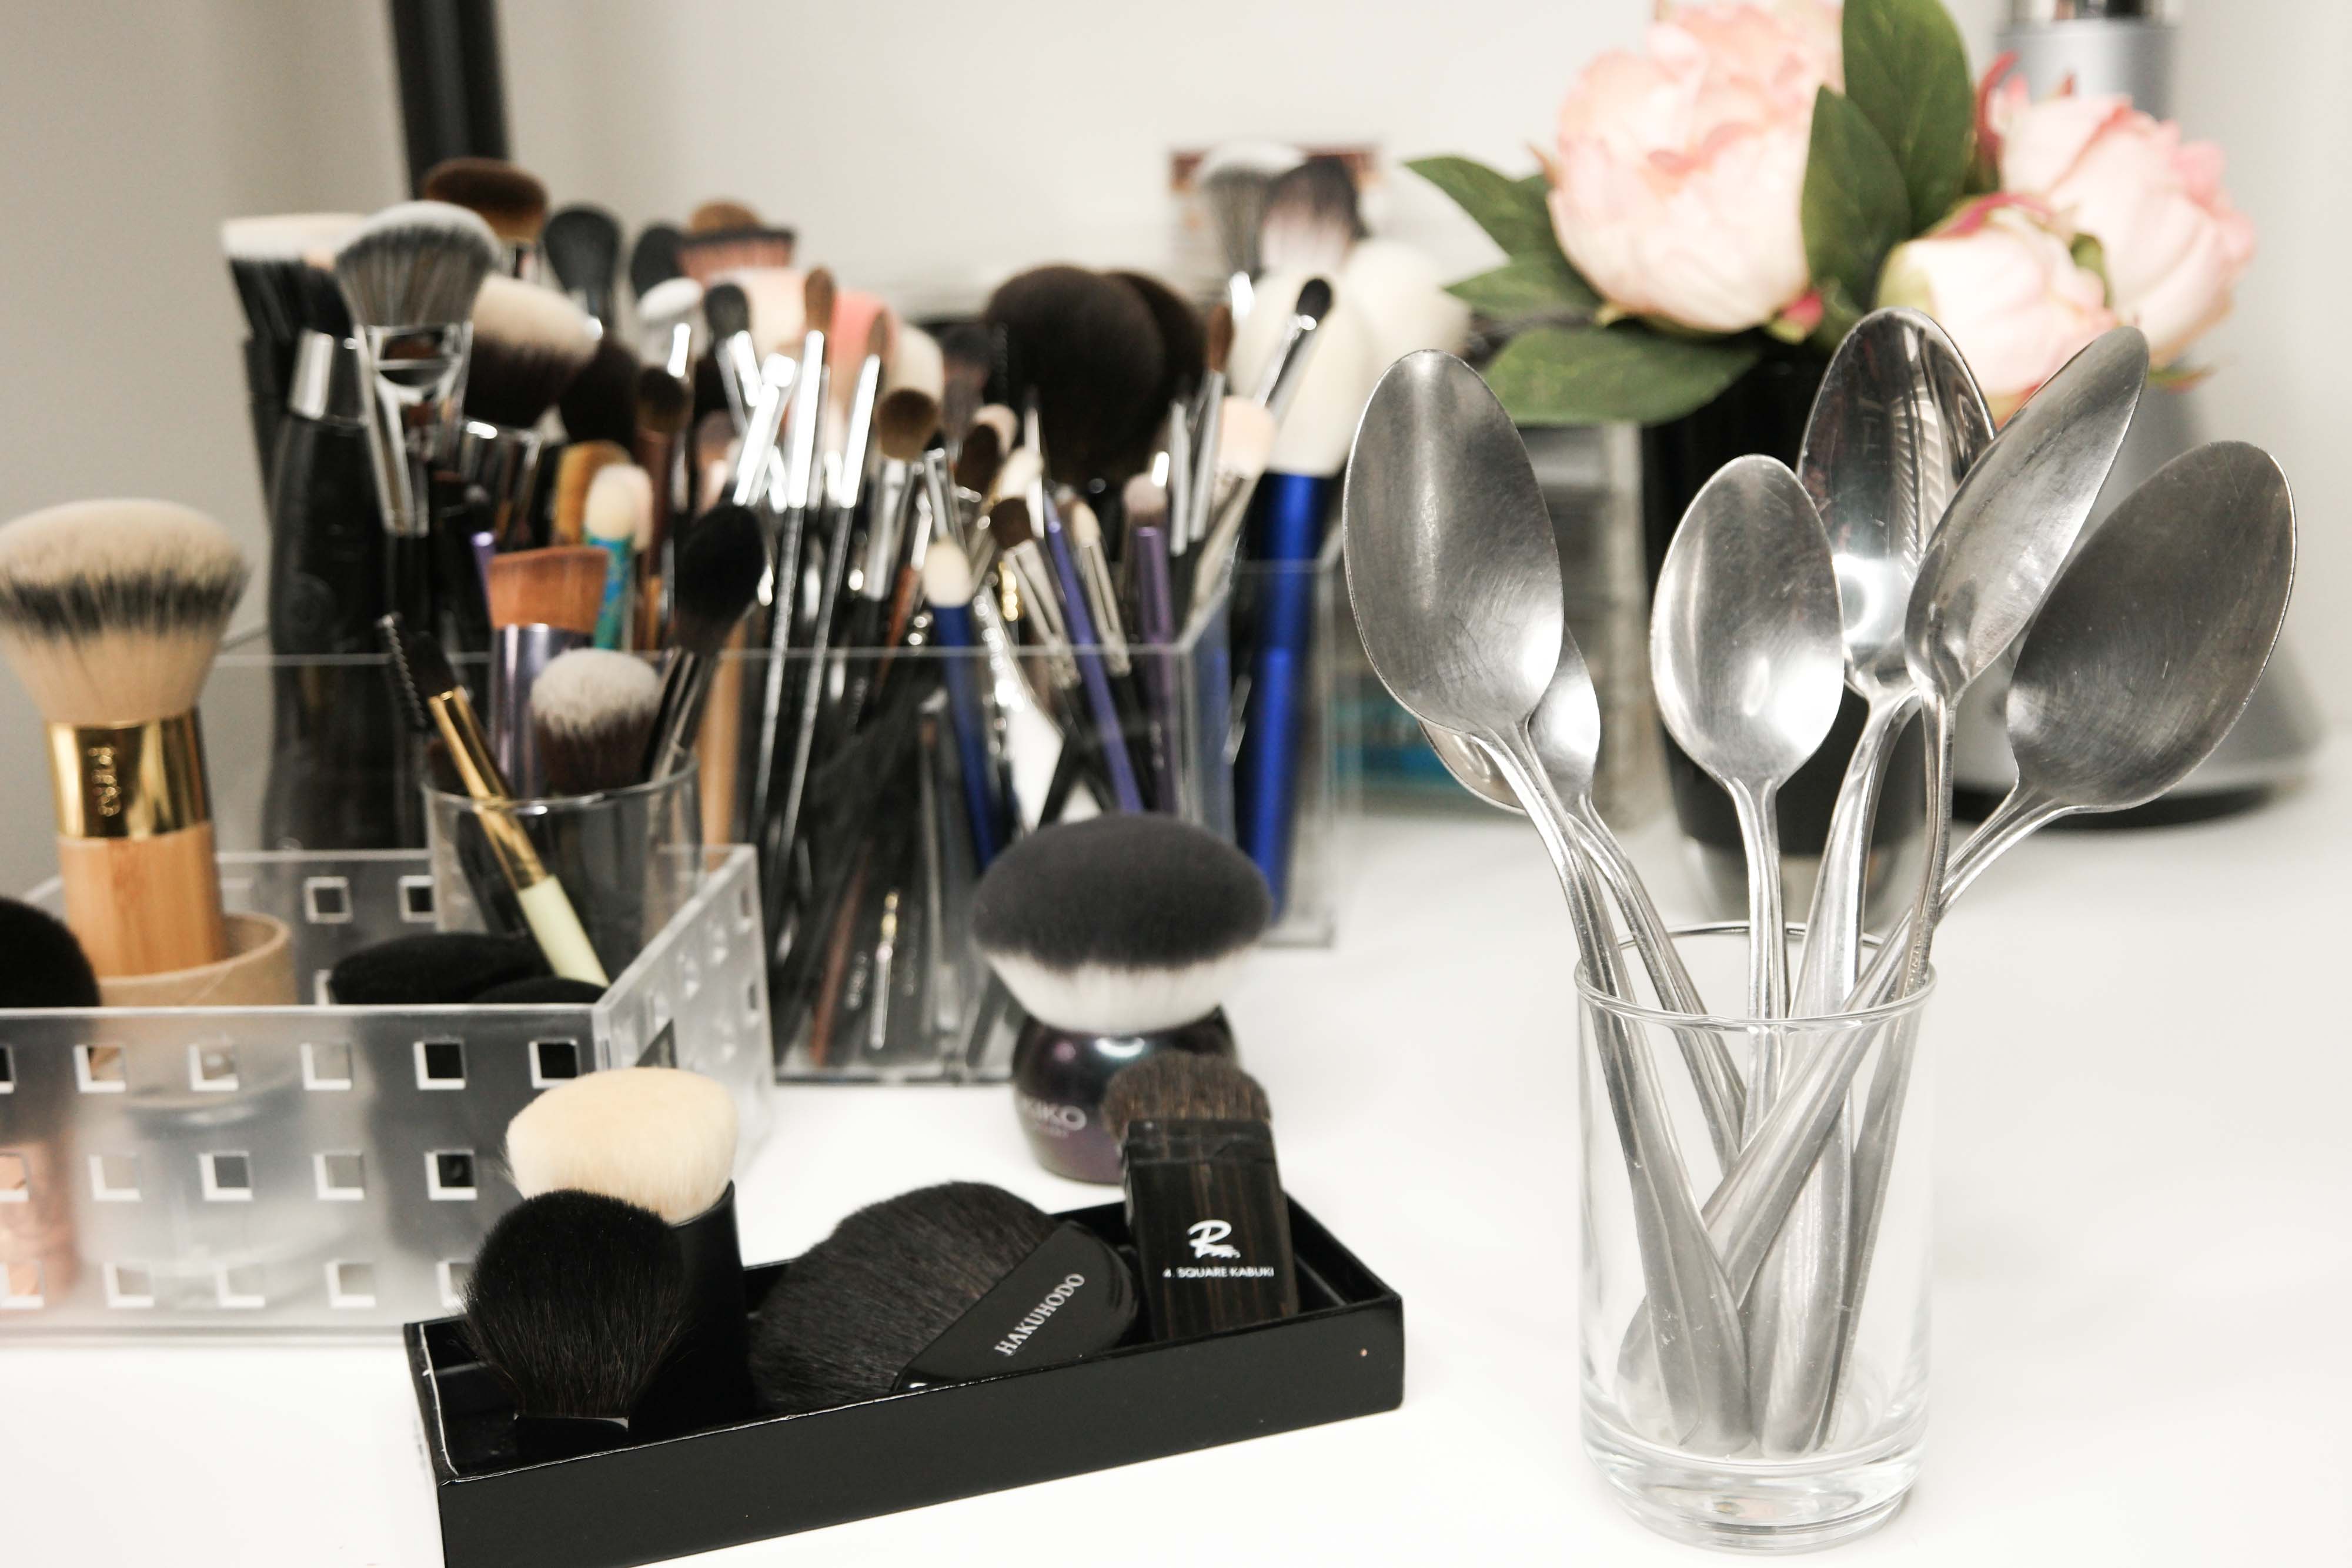 Spoon Theory Beauty: How to Look Great When You Feel Like Crap